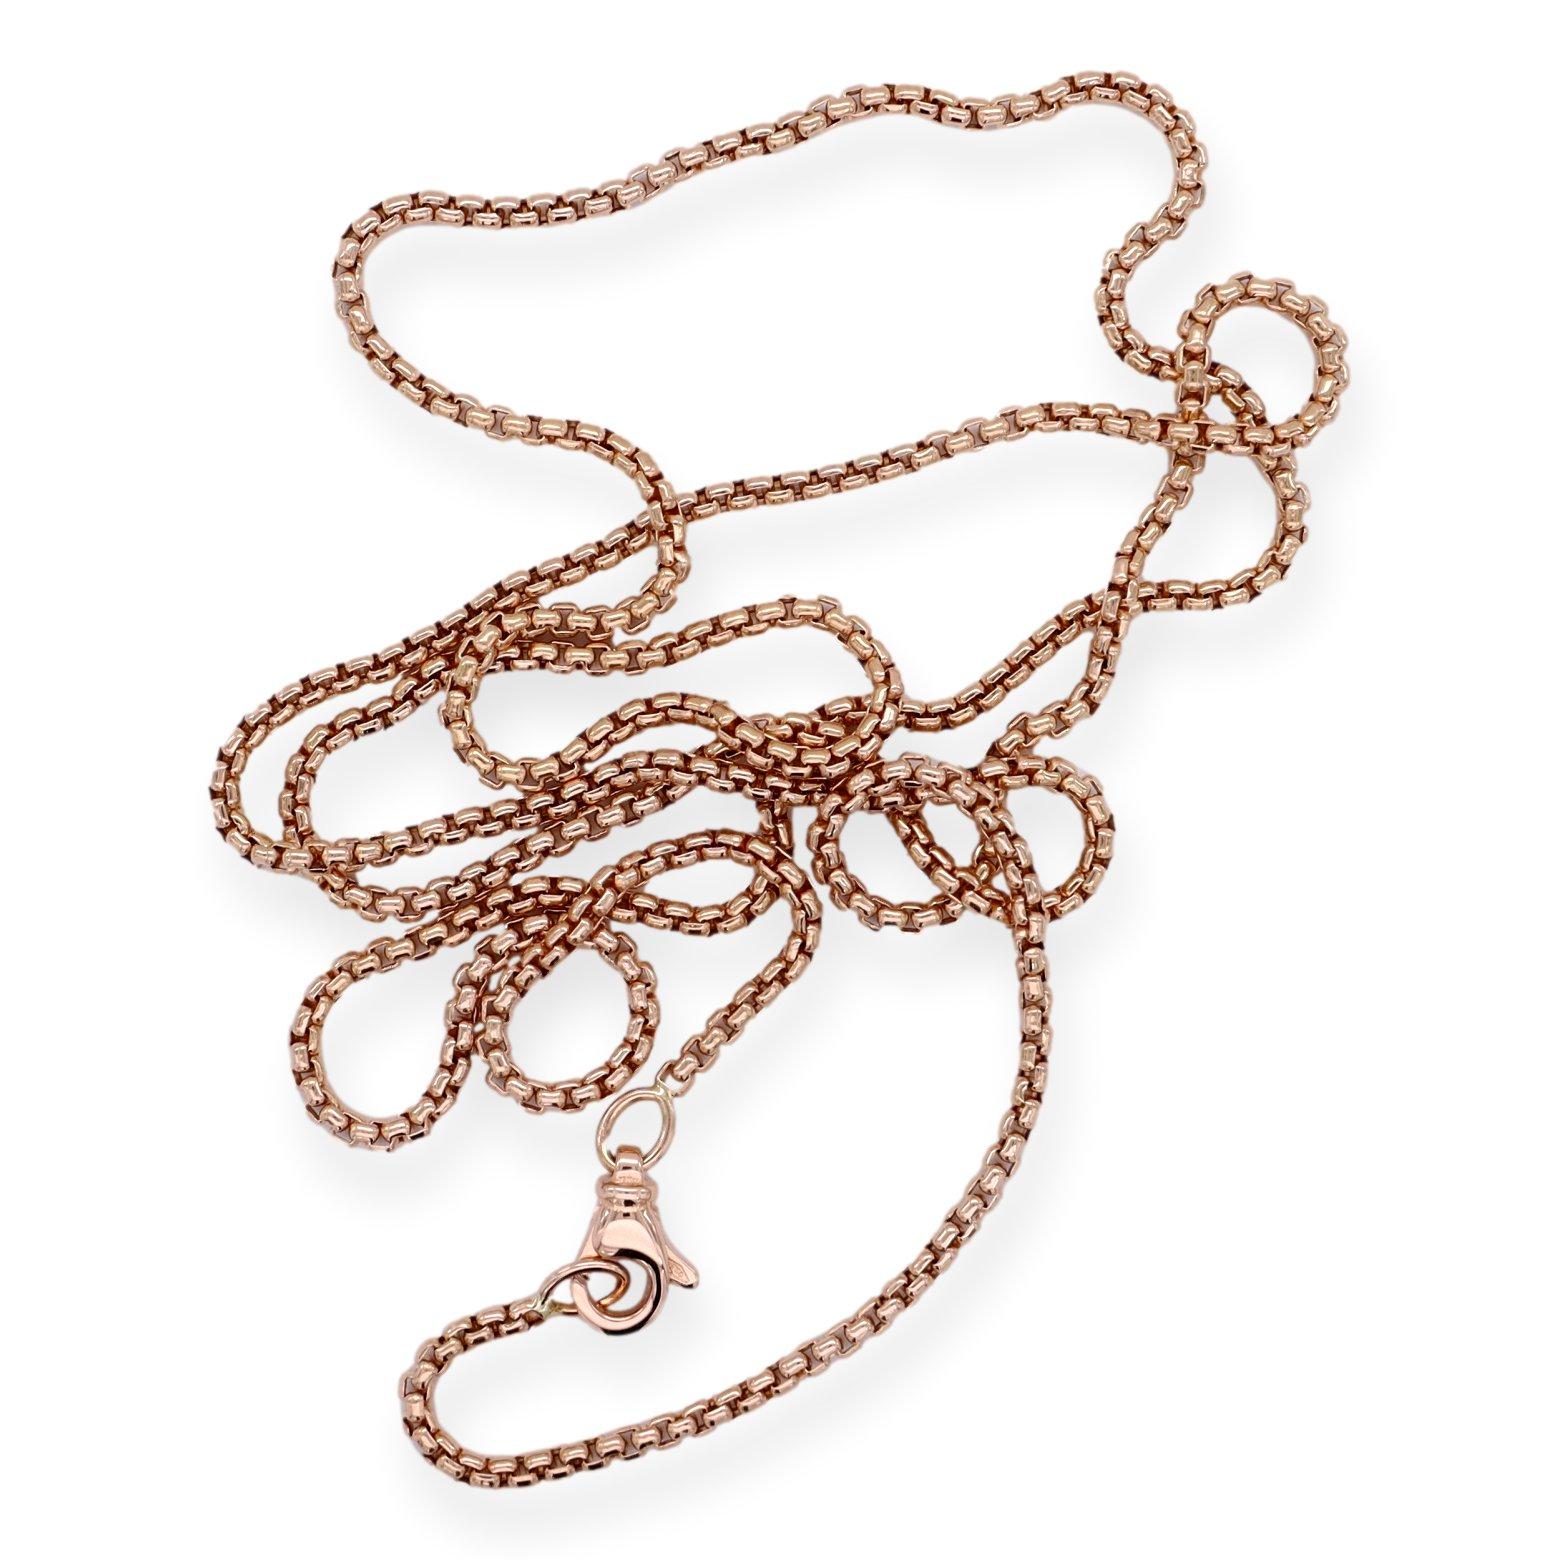 David Yurman box chain men's necklace finely crafted in 18 karat rose gold measuring 26 inches long and 1.7 mm wide with large lobster closure. Fully hallmarked with logo and metal content.

Pendant Specifications
Brand: David Yurman
Hallmarks: DY